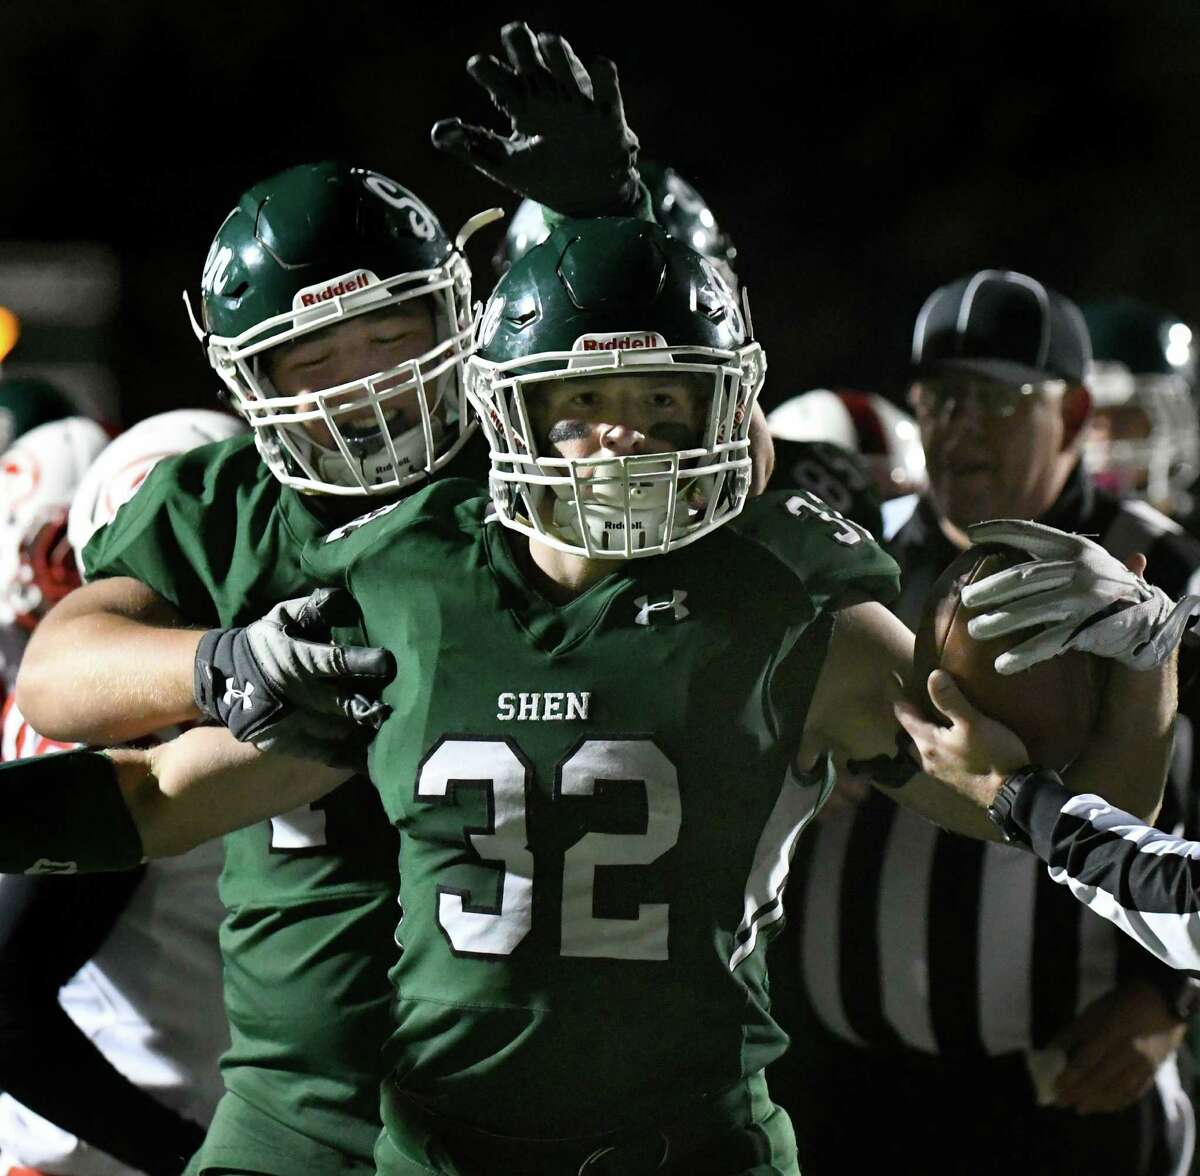 Shen's Nick Cosgrove, center, celebrates a touchdown with Ryan Collette, left, during their football game on Friday, Oct. 14, 2016, at Shenendehowa in Clifton Park, N.Y. (Cindy Schultz / Times Union)